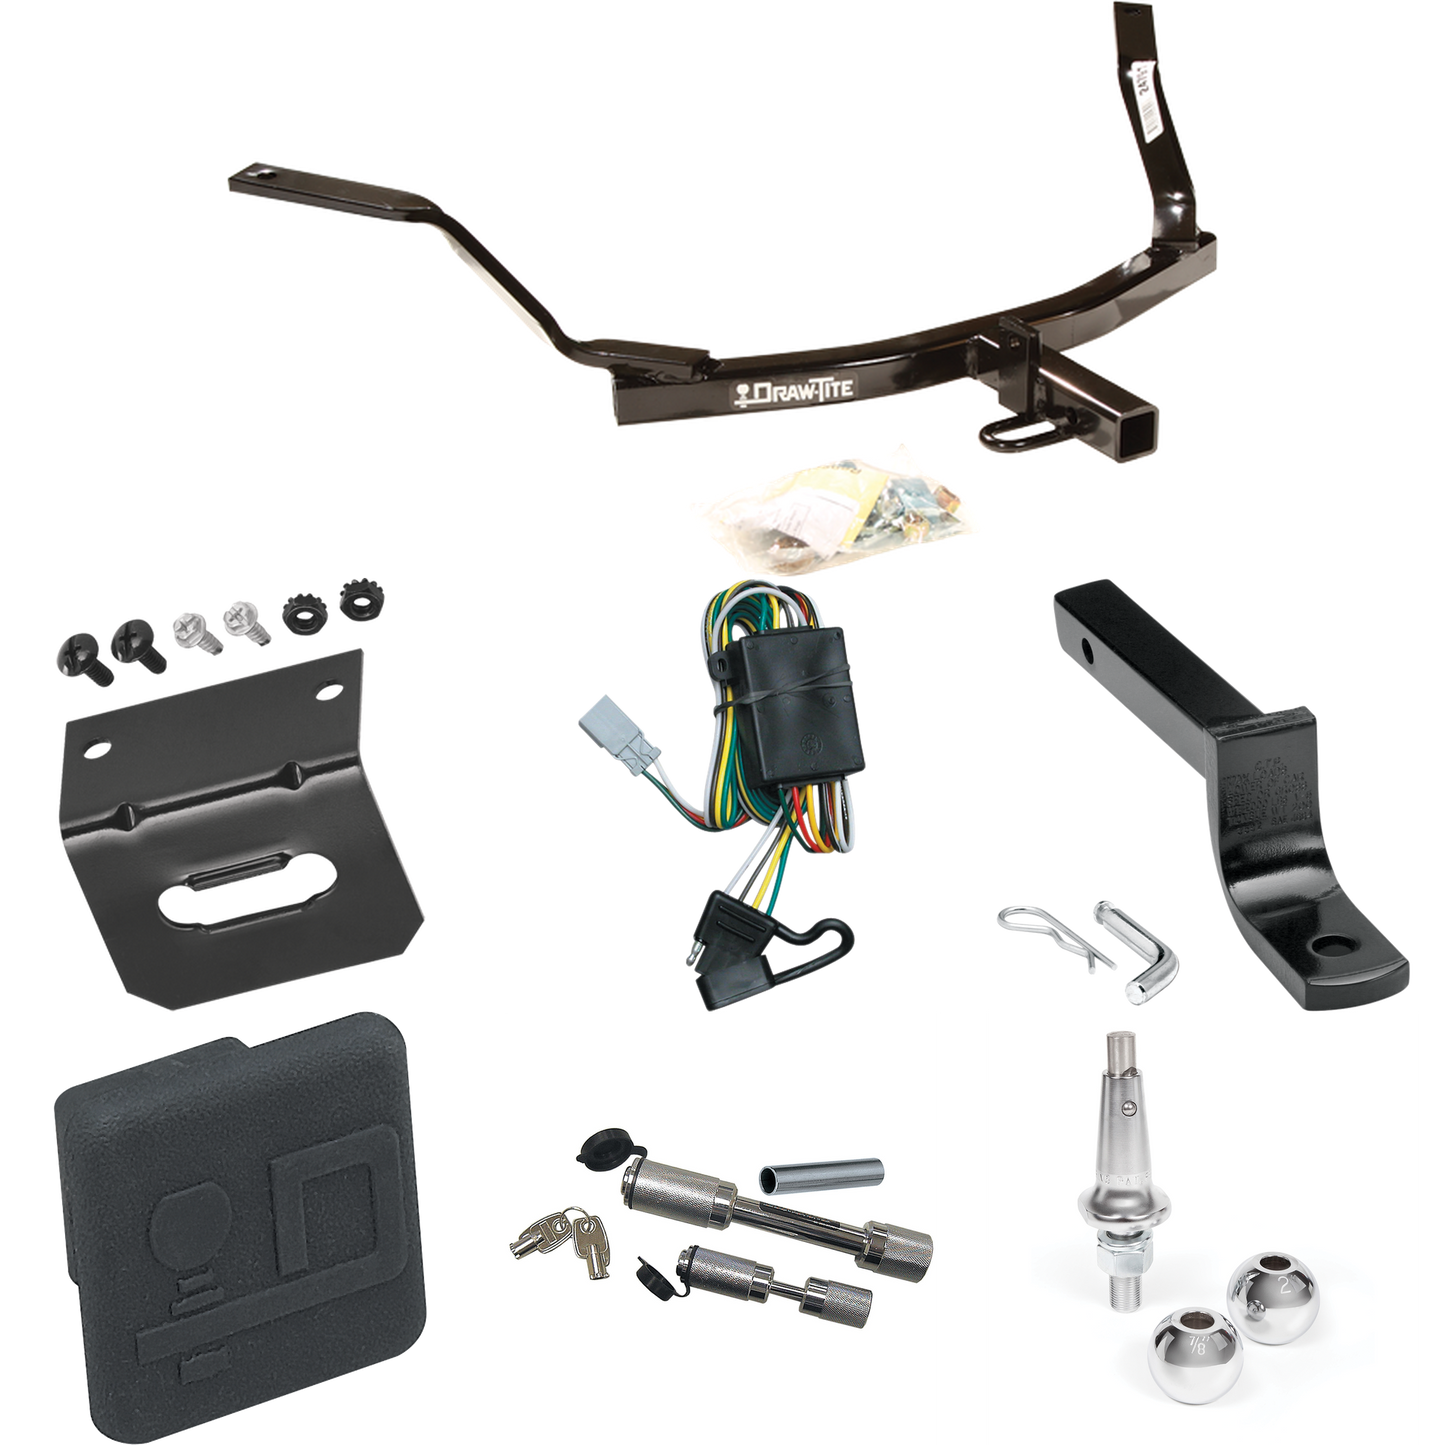 Fits 1998-2002 Honda Accord Trailer Hitch Tow PKG w/ 4-Flat Wiring Harness + Draw-Bar + Interchangeable 1-7/8" & 2" Balls + Wiring Bracket + Hitch Cover + Dual Hitch & Coupler Locks (For Sedan Models) By Draw-Tite